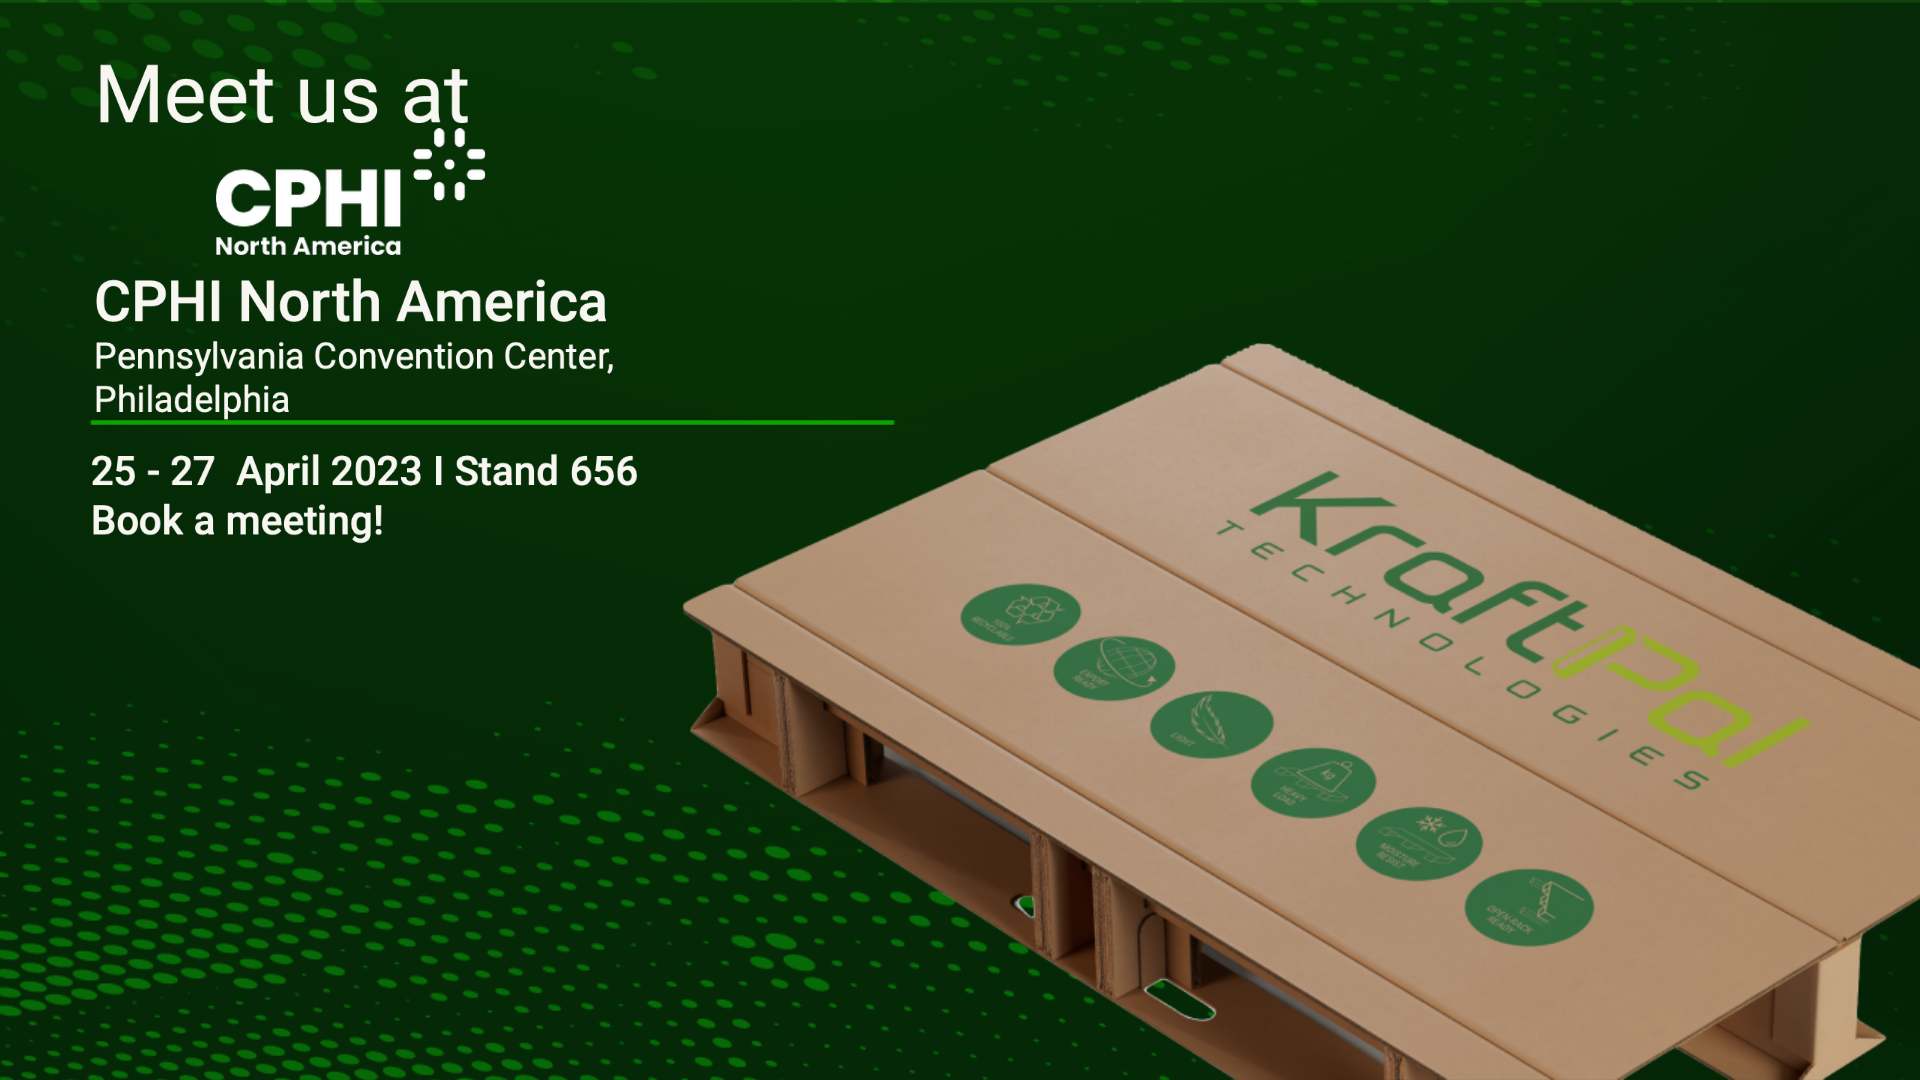 KraftPal Technologies to Exhibit Sustainable Corrugated Cardboard Pallets at CPHI North America 2023